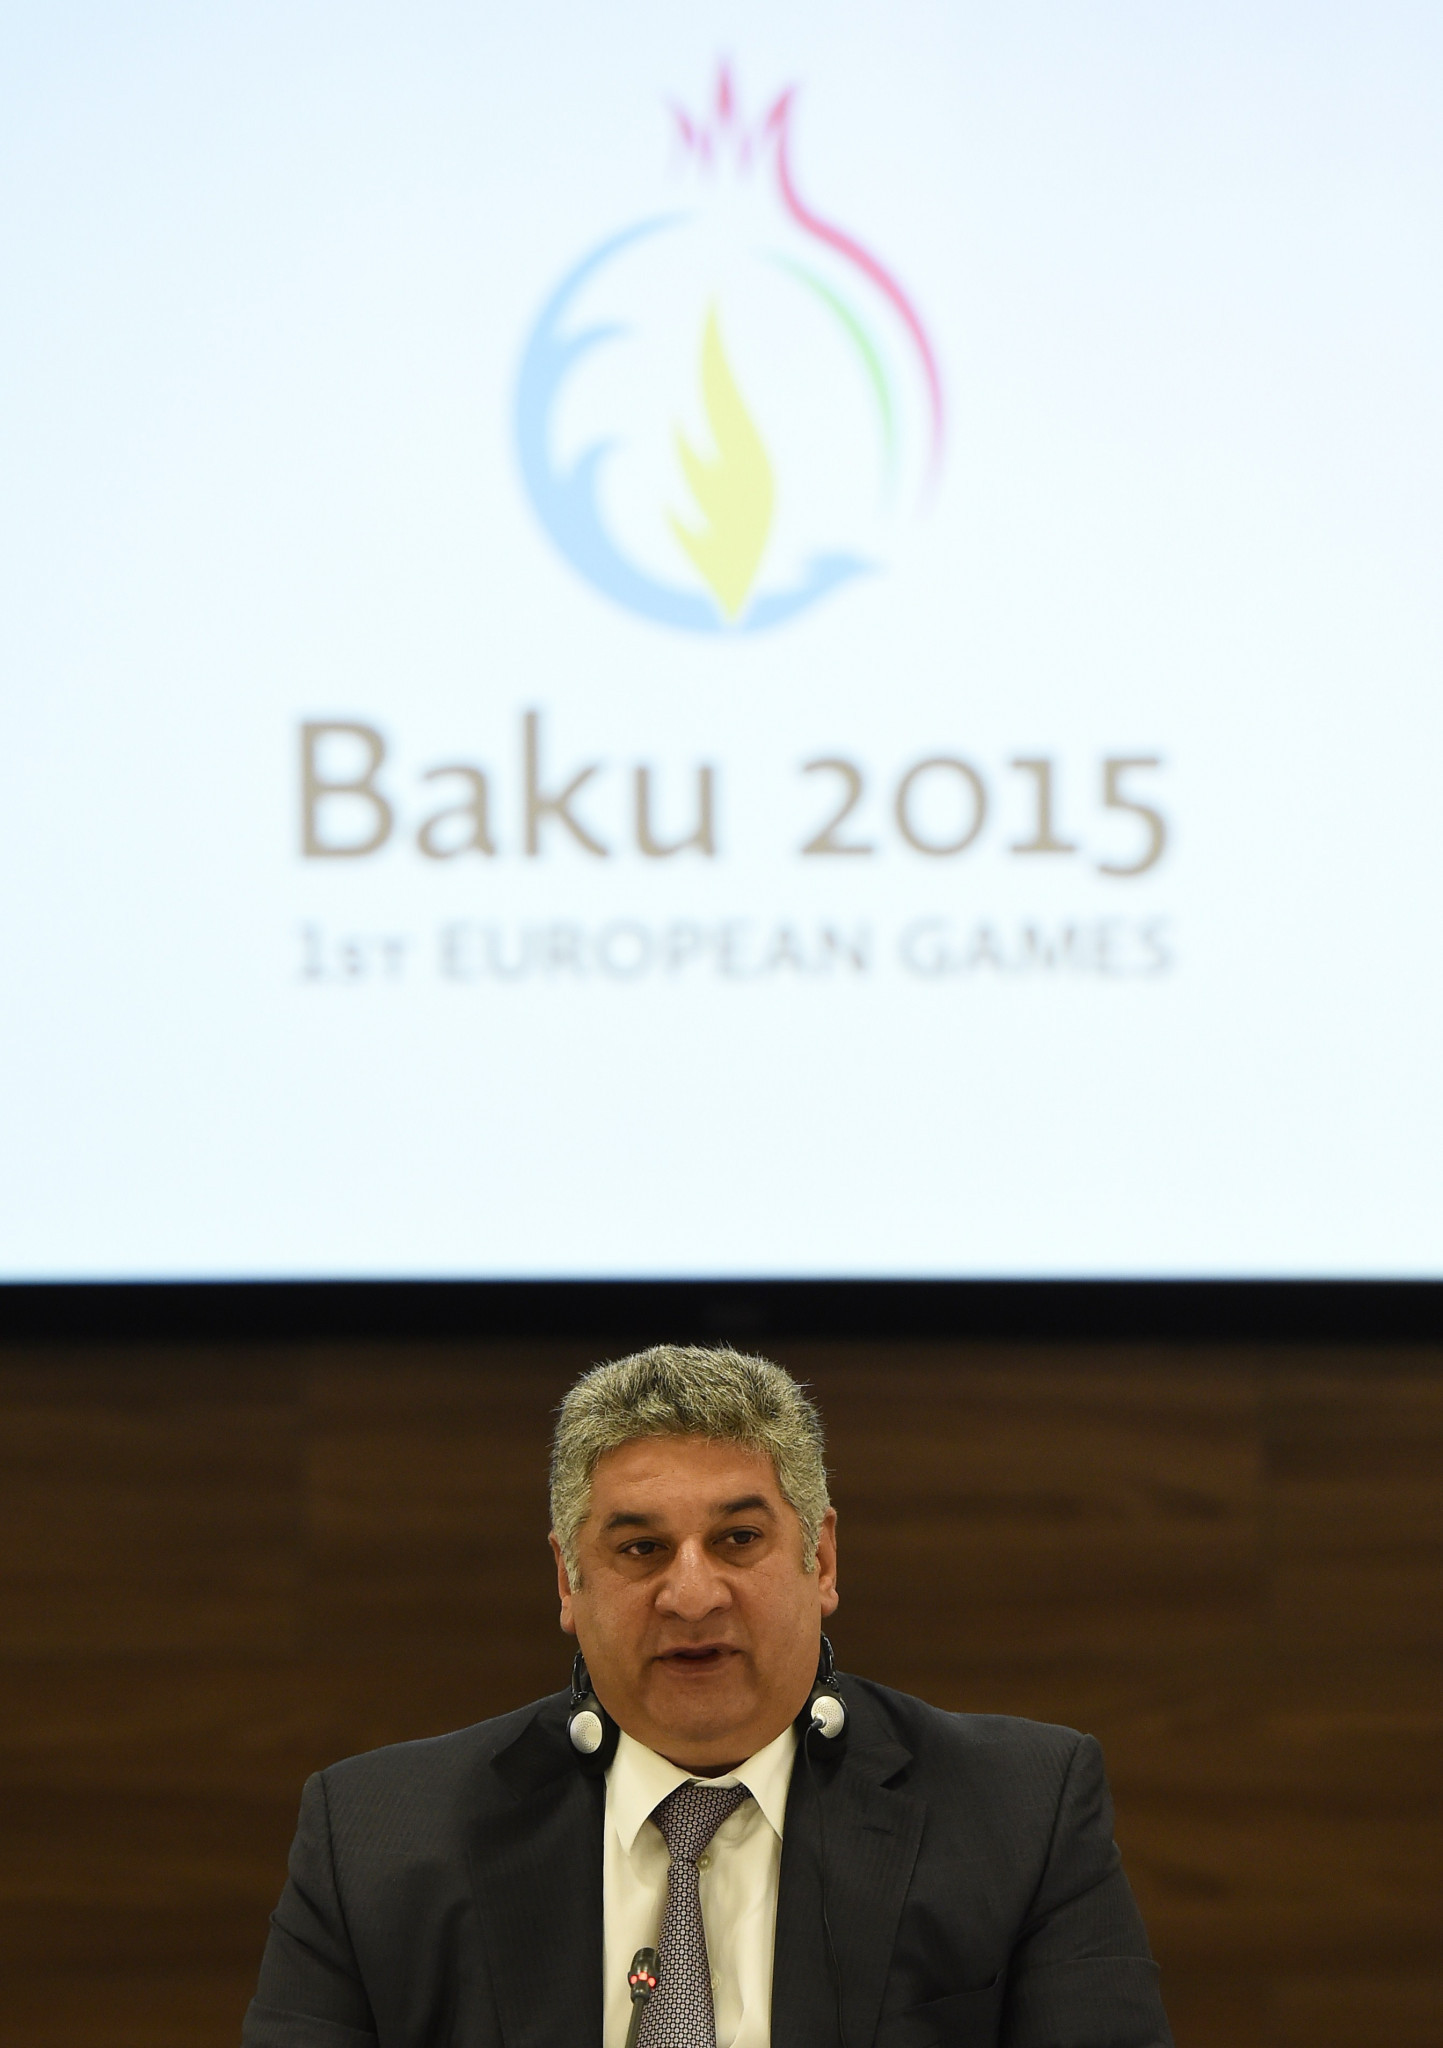 Azad Rahimov played a leading role in the organisation of the first European Games at Baku in 2015 ©Getty Images